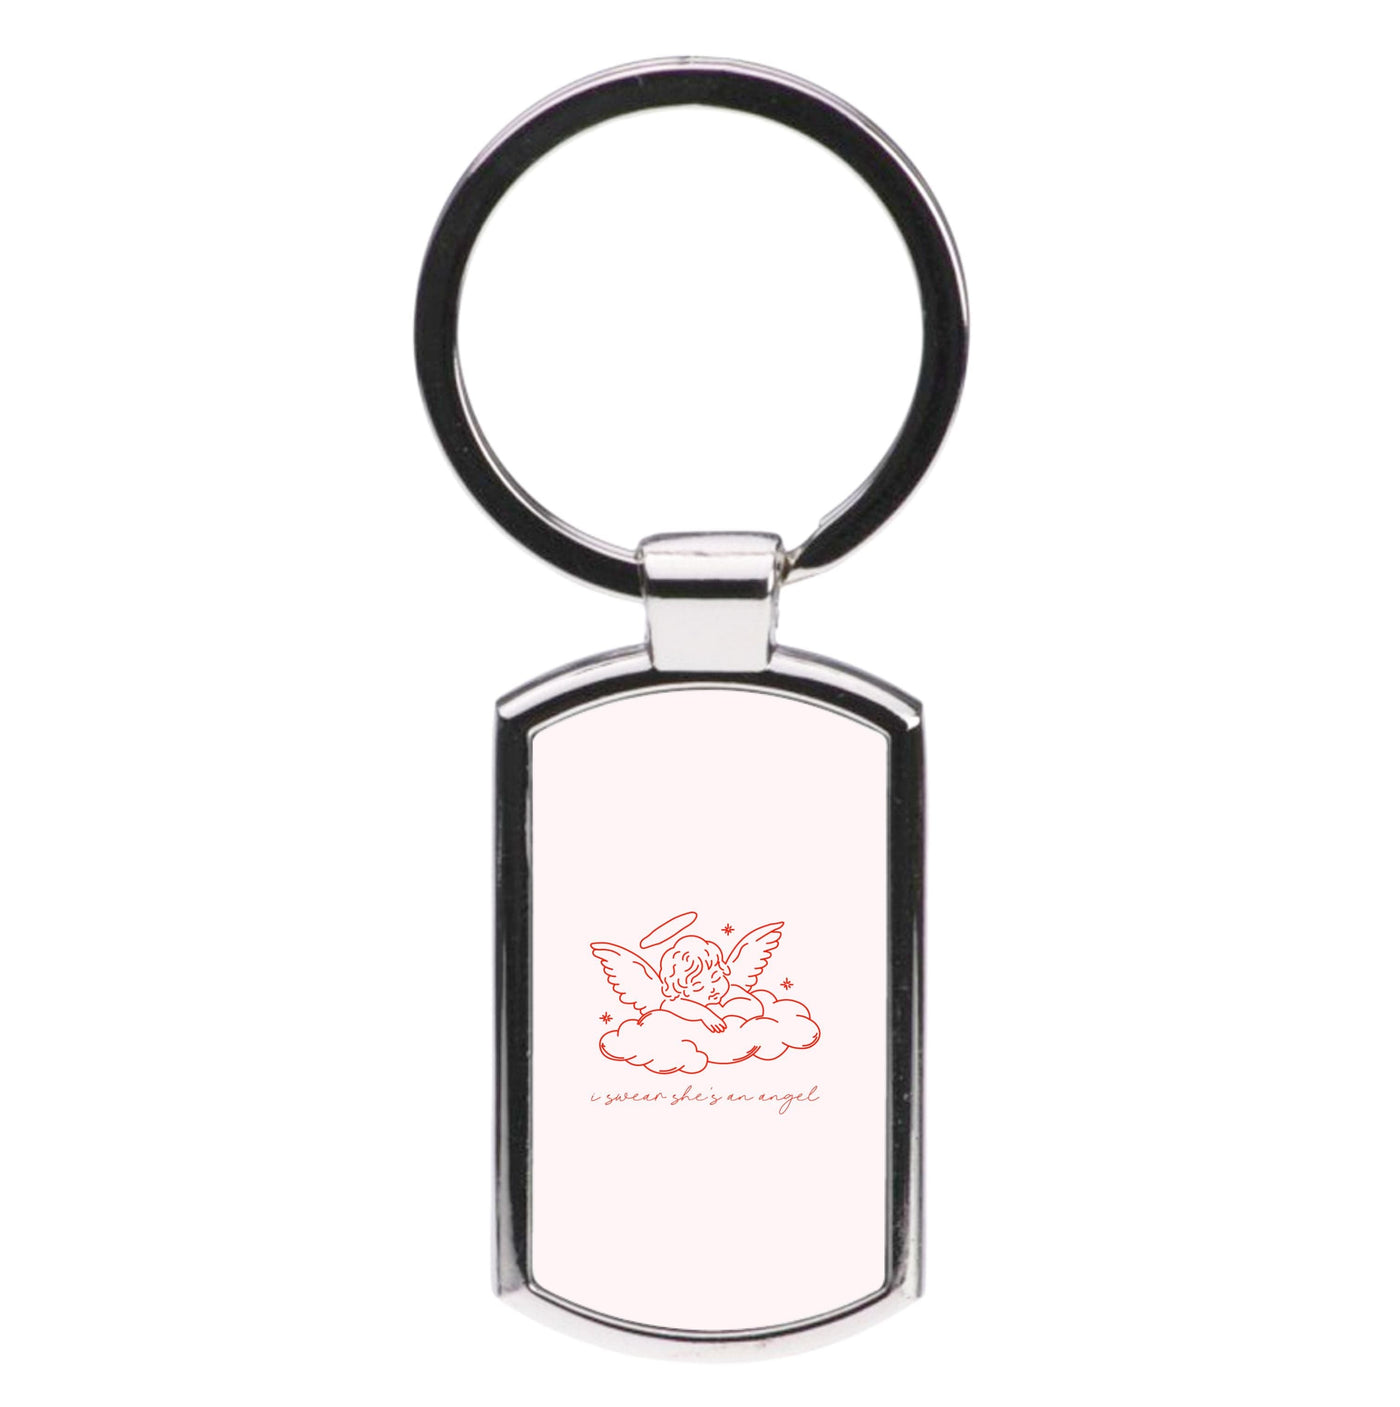 I Swear Shes An Angel - Clean Girl Aesthetic Luxury Keyring